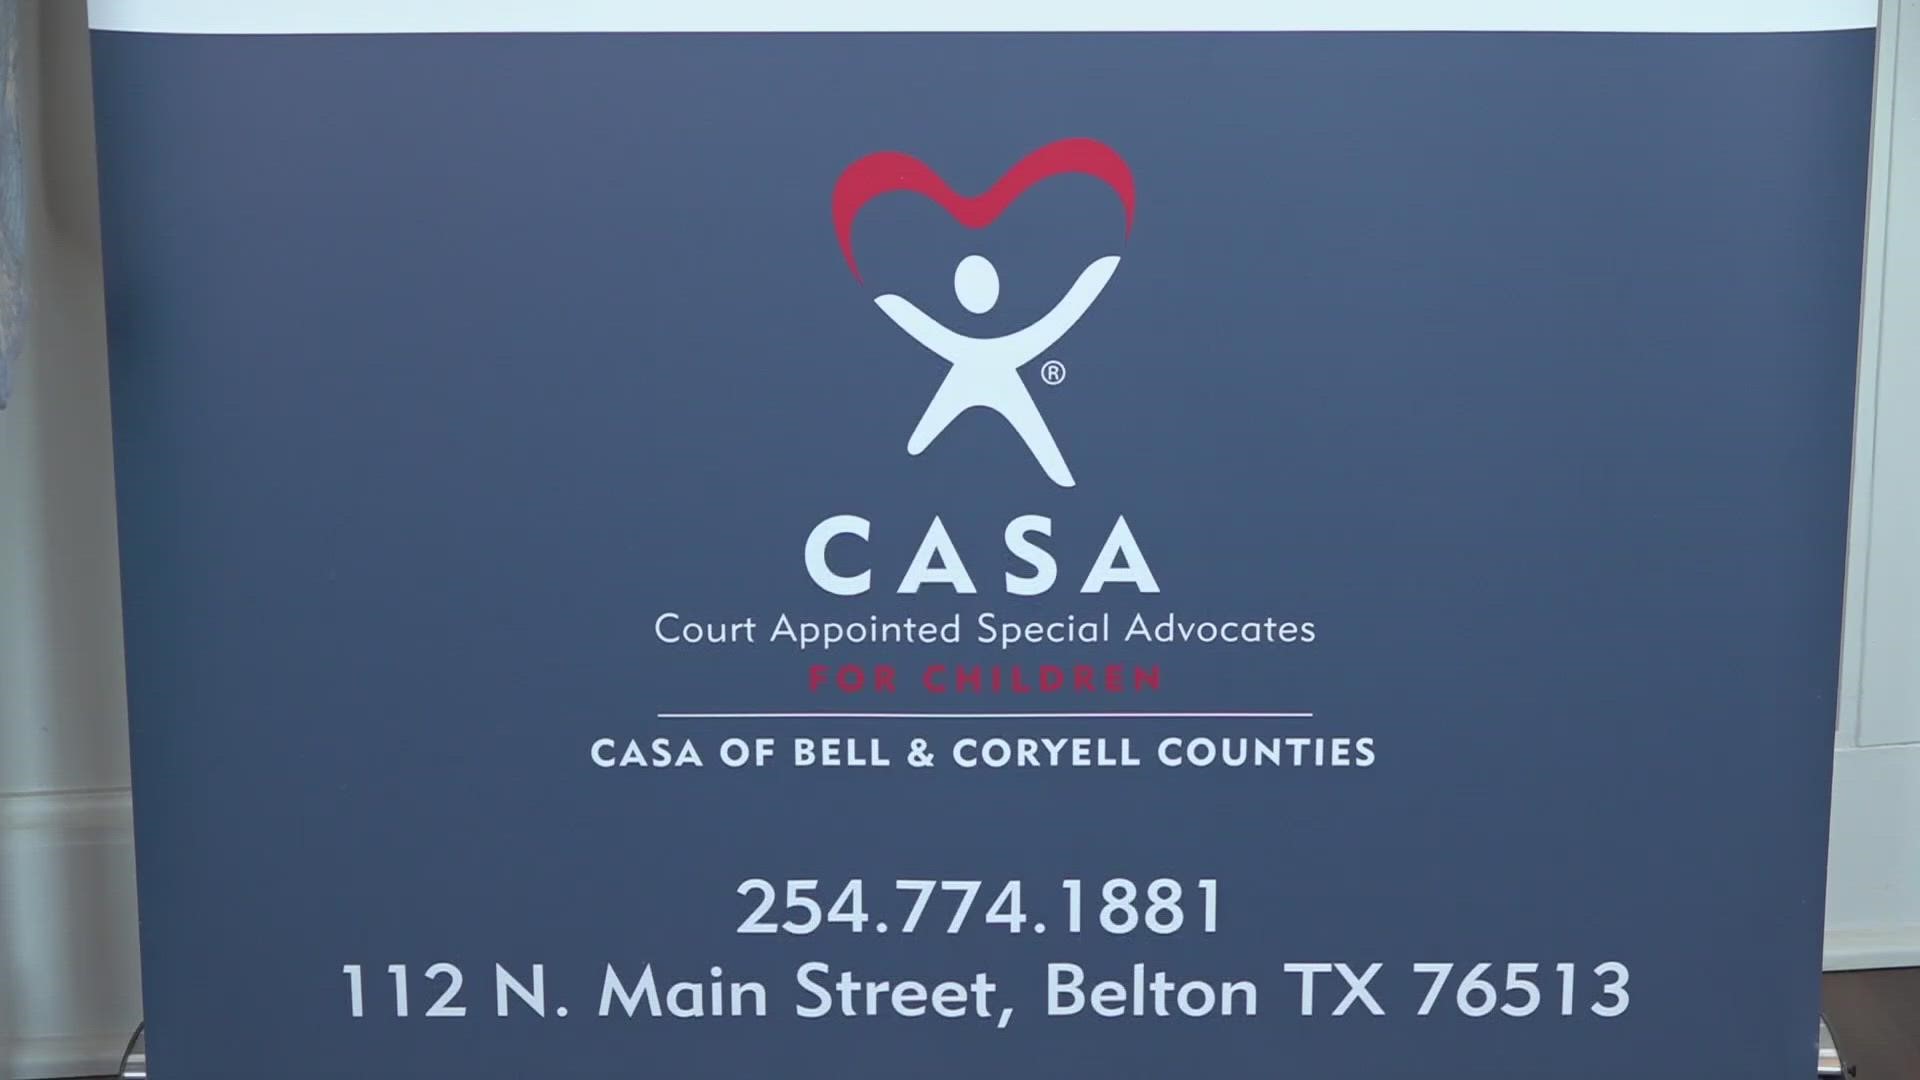 This week, Texas Today focuses on what it's like to be a brand-new CASA advocate.